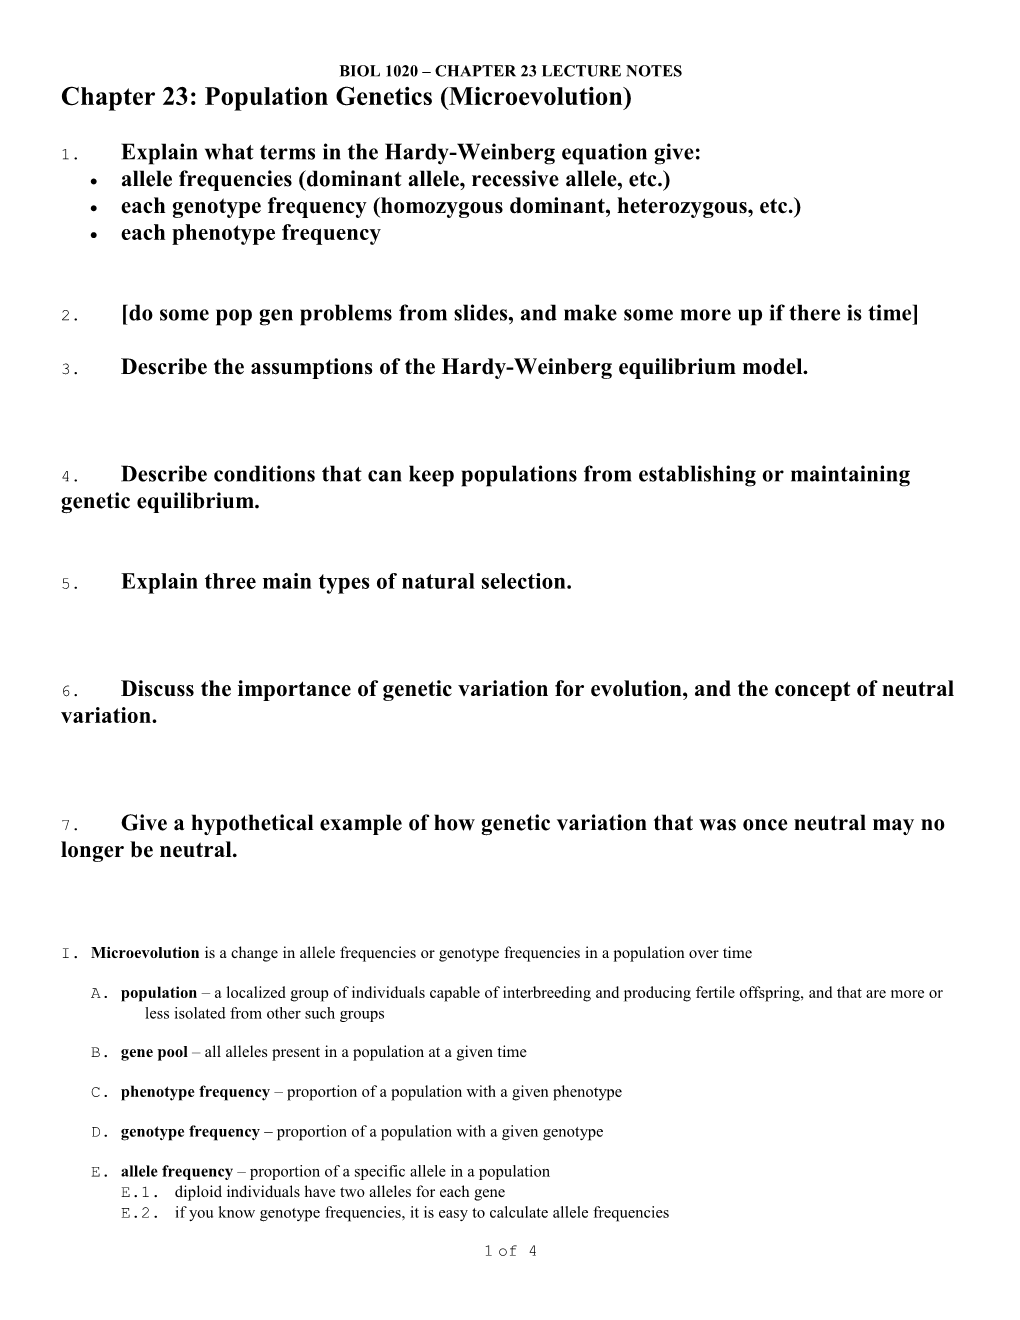 Biol 1020 Chapter 23 Lecture Notes